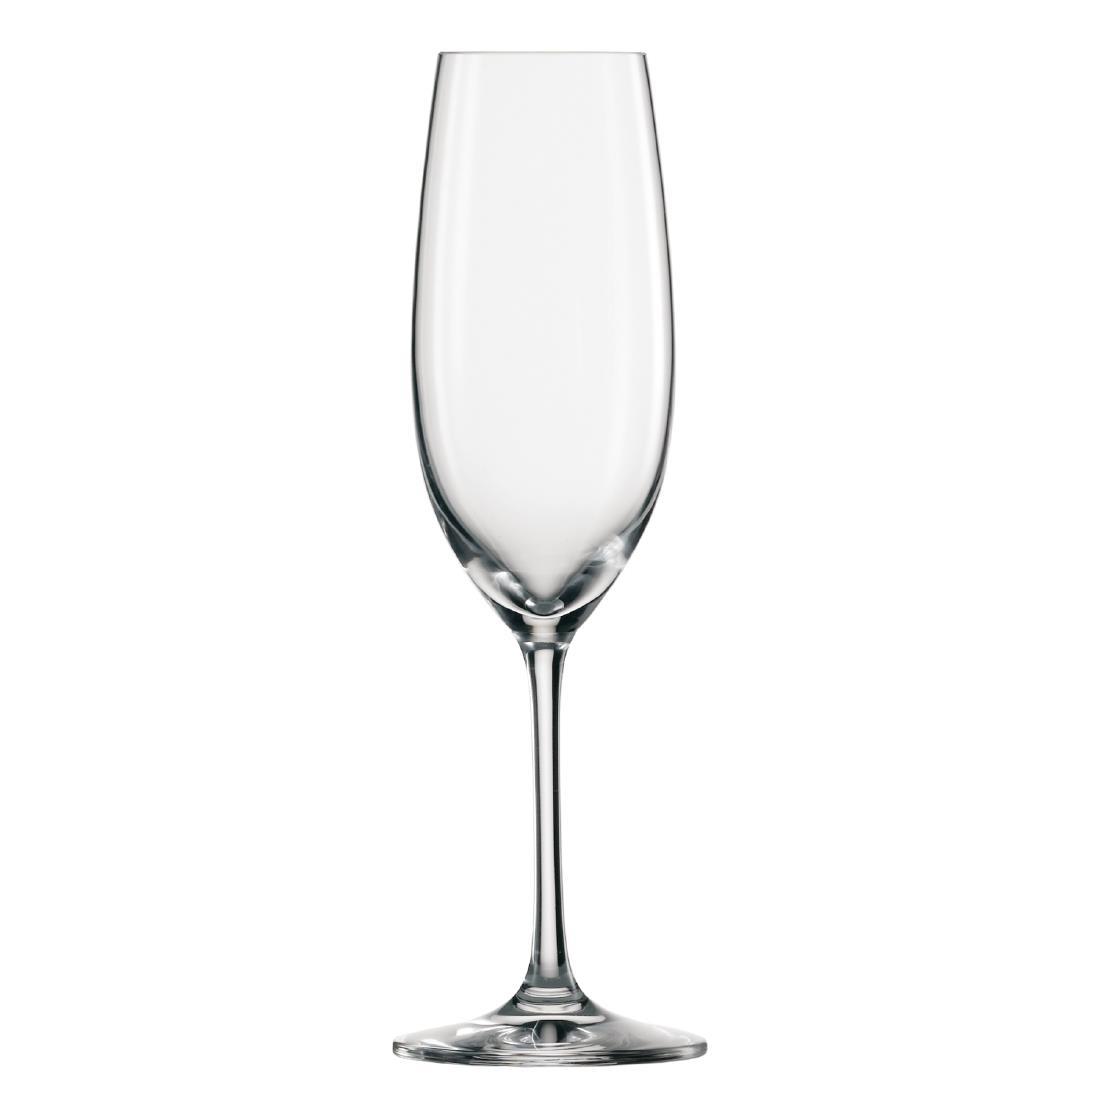 Schott Zwiesel Ivento Champagne flute 230ml (Pack of 6) - GL137  - 1